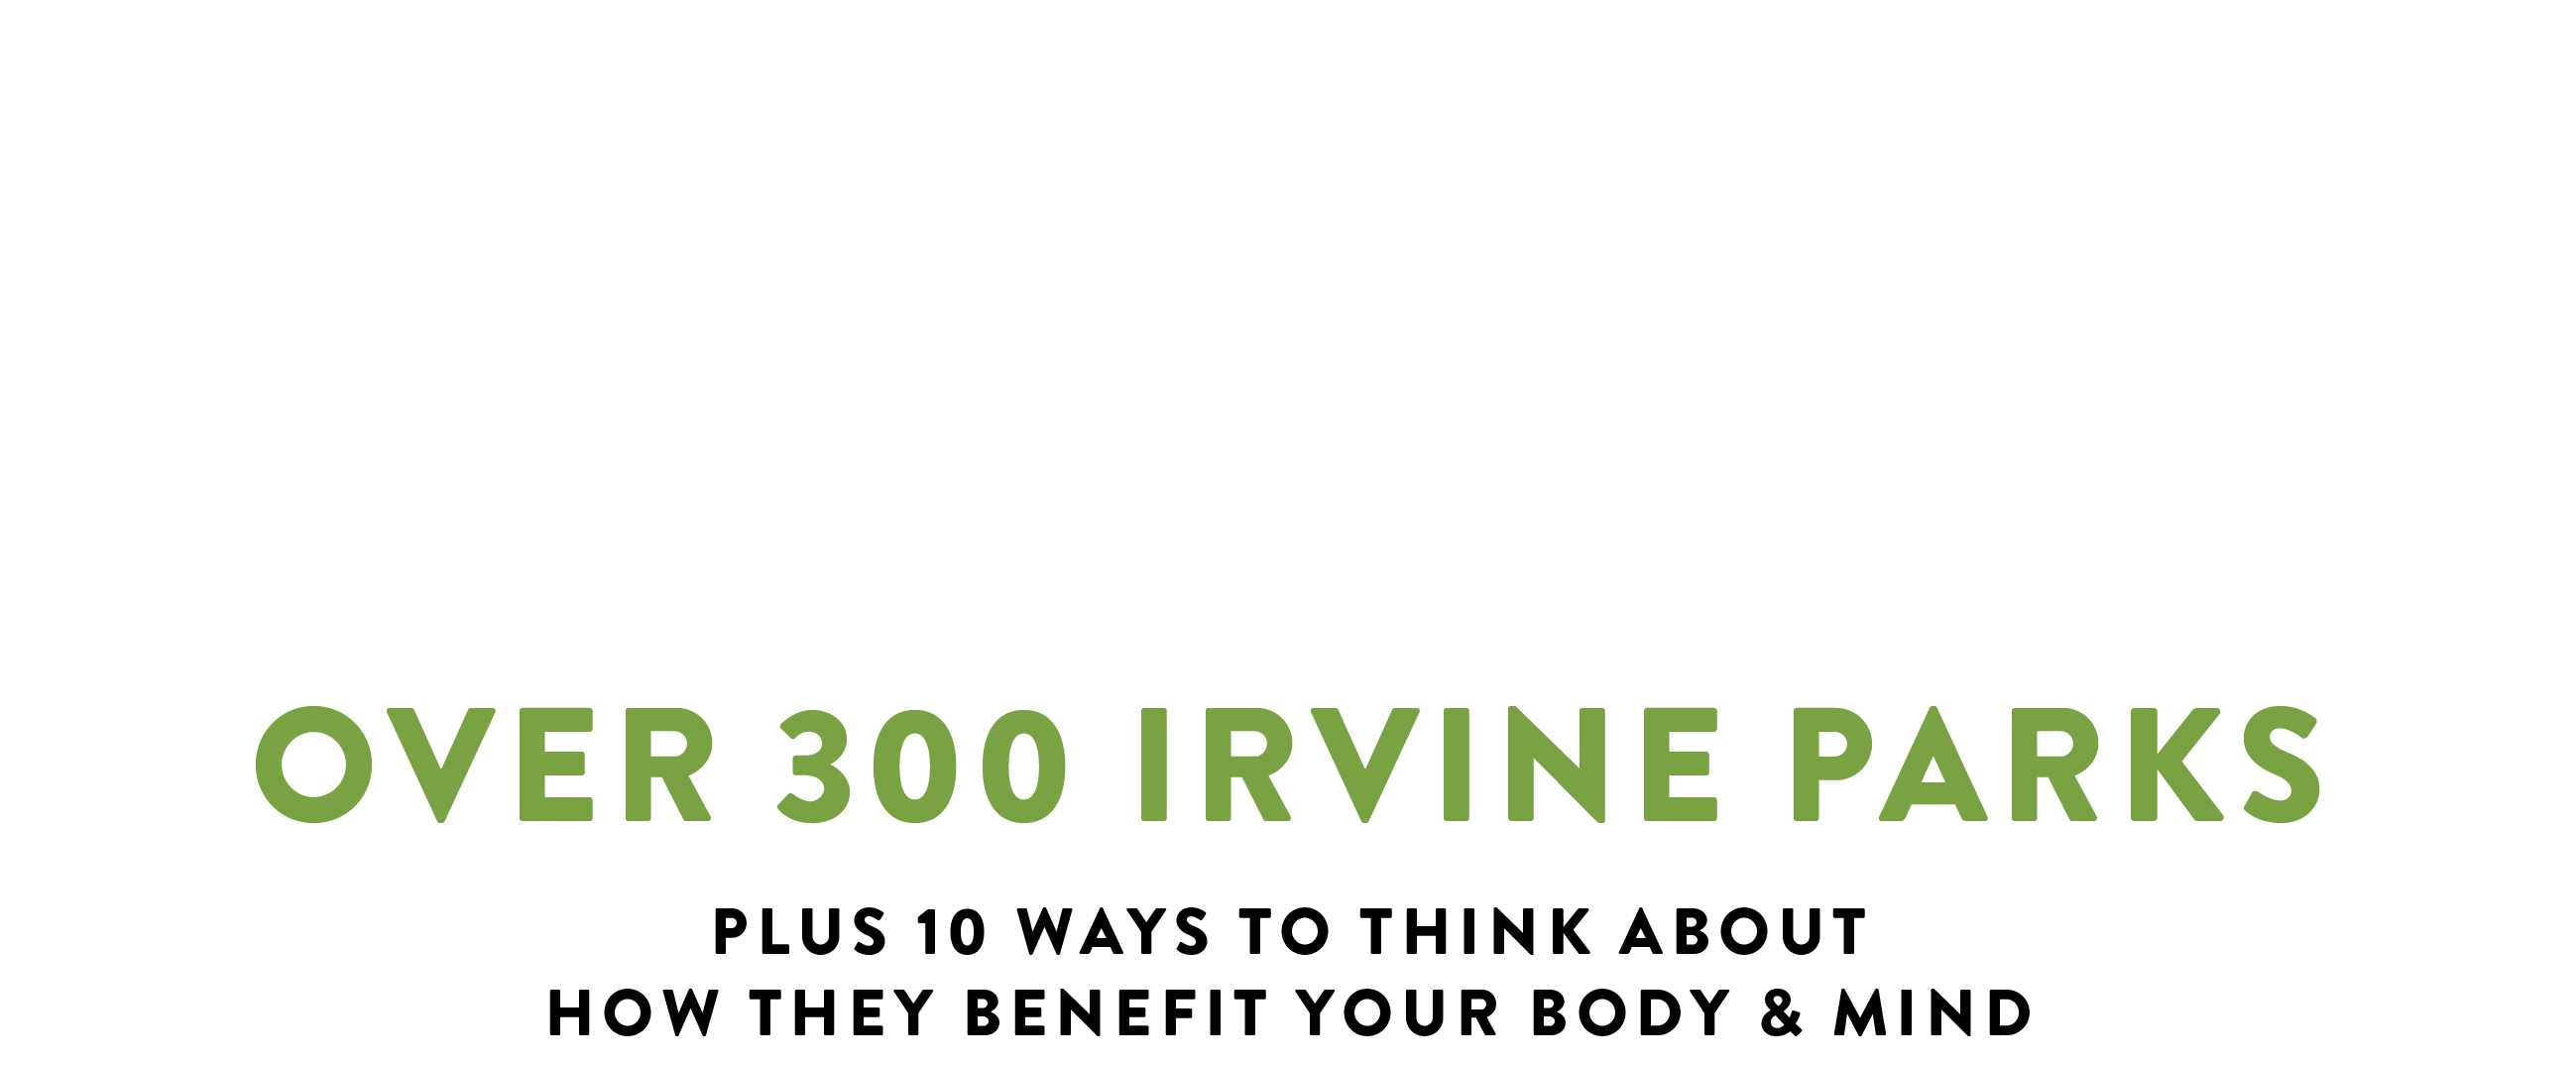 Parks Guide: Over 300 Irvine Parks, plus 10 ways to think about how they benefit y our body & mind